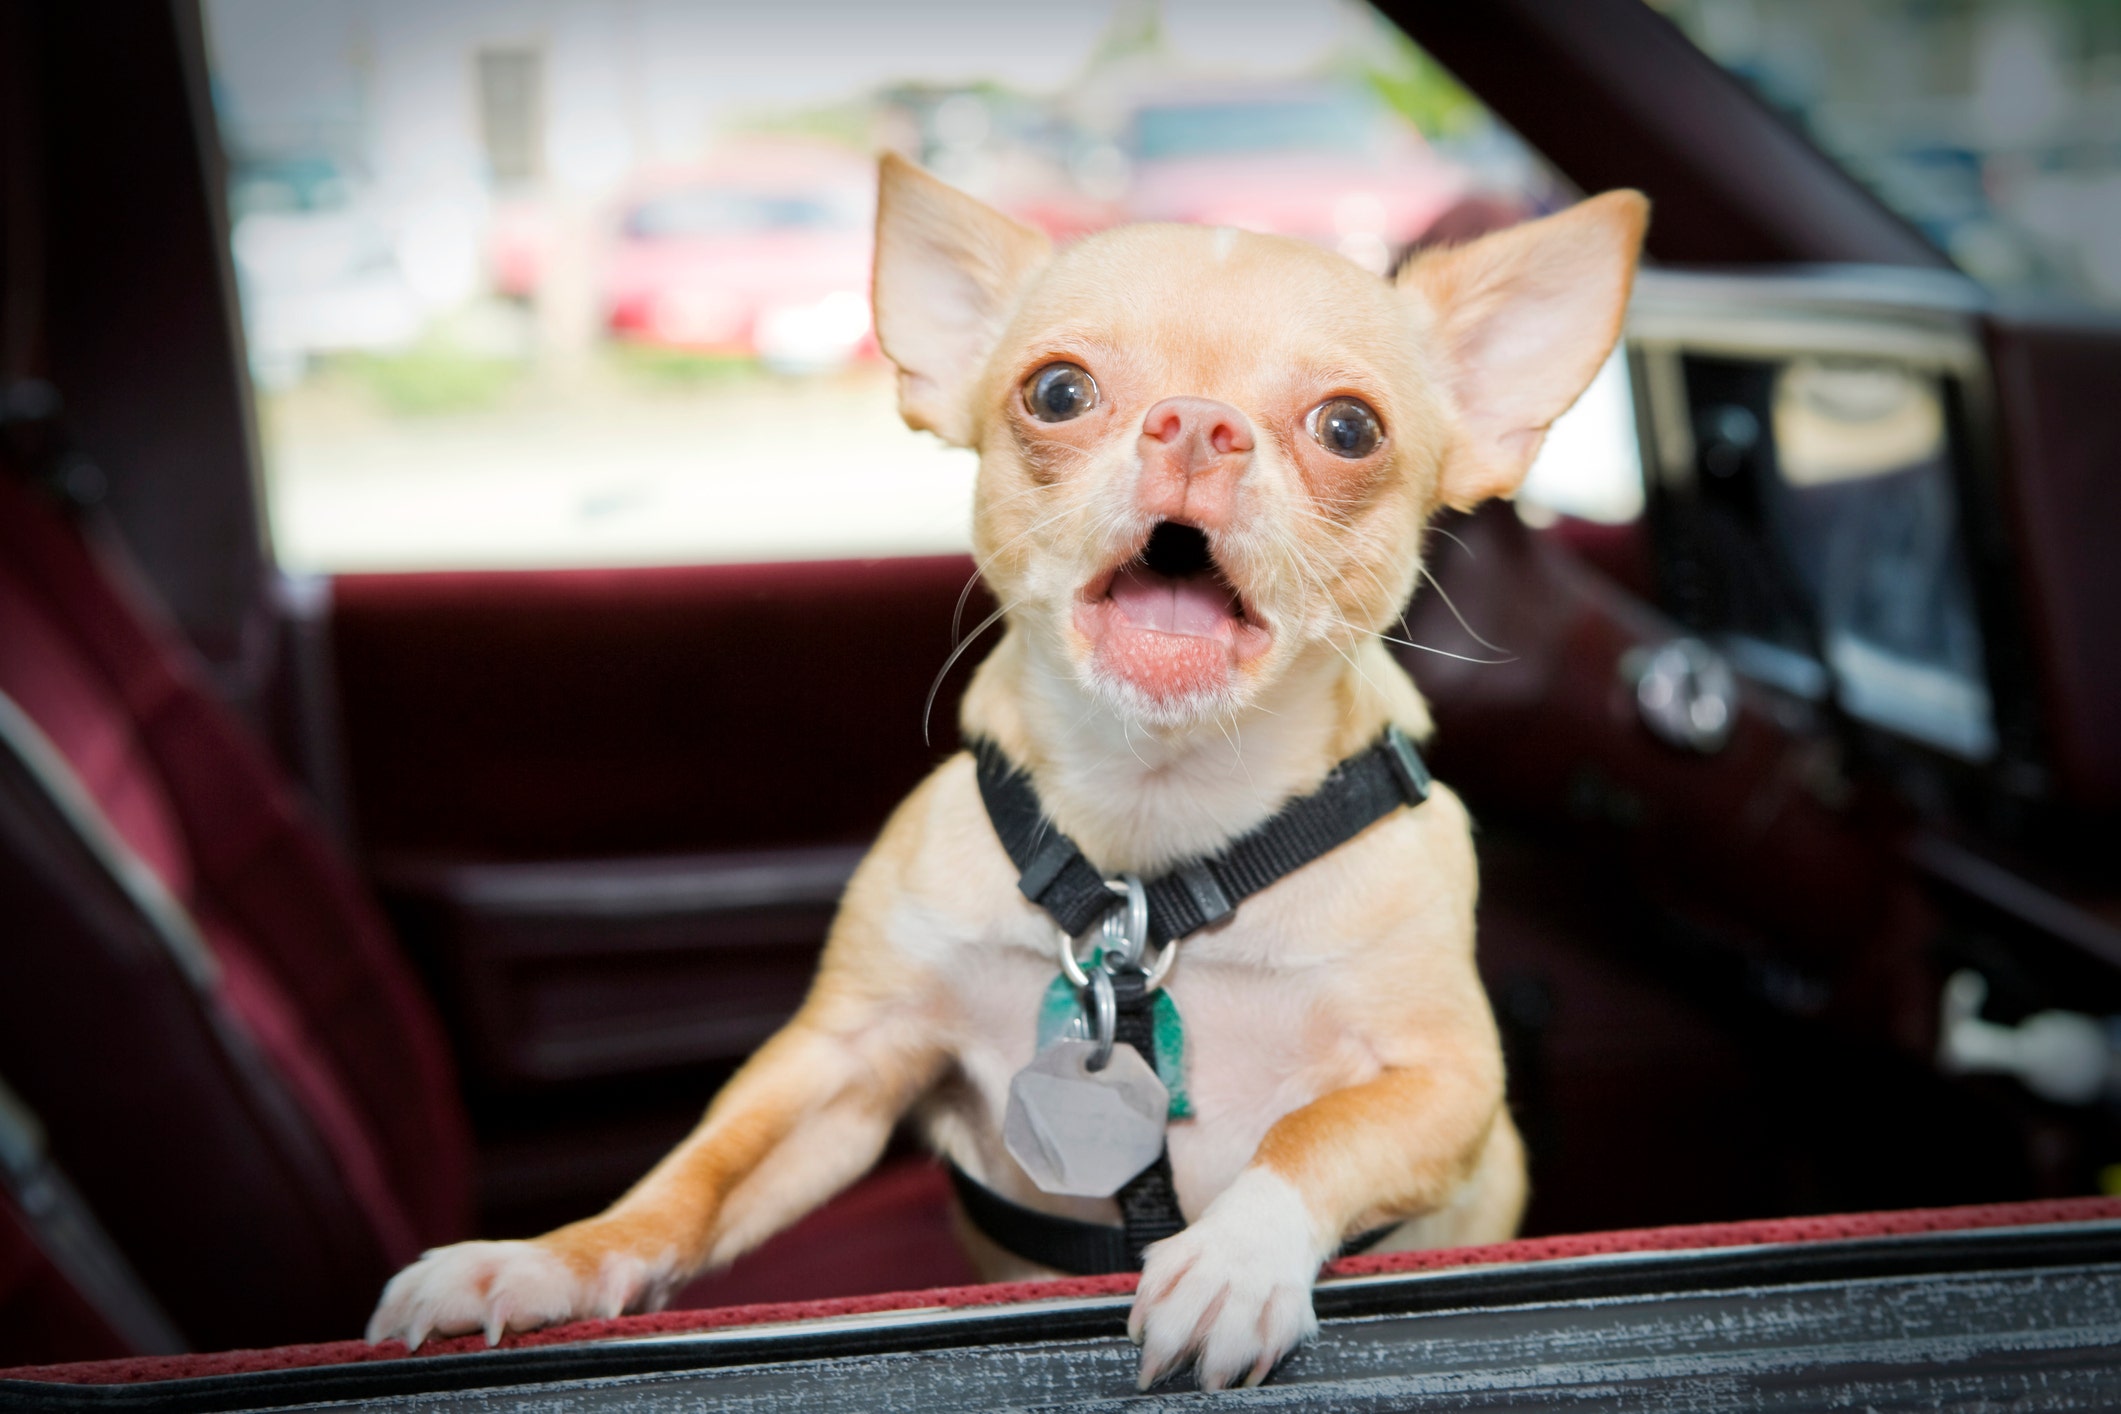 Prancer, the 'haunted Victorian child' Chihuahua, gets adopted following viral ad